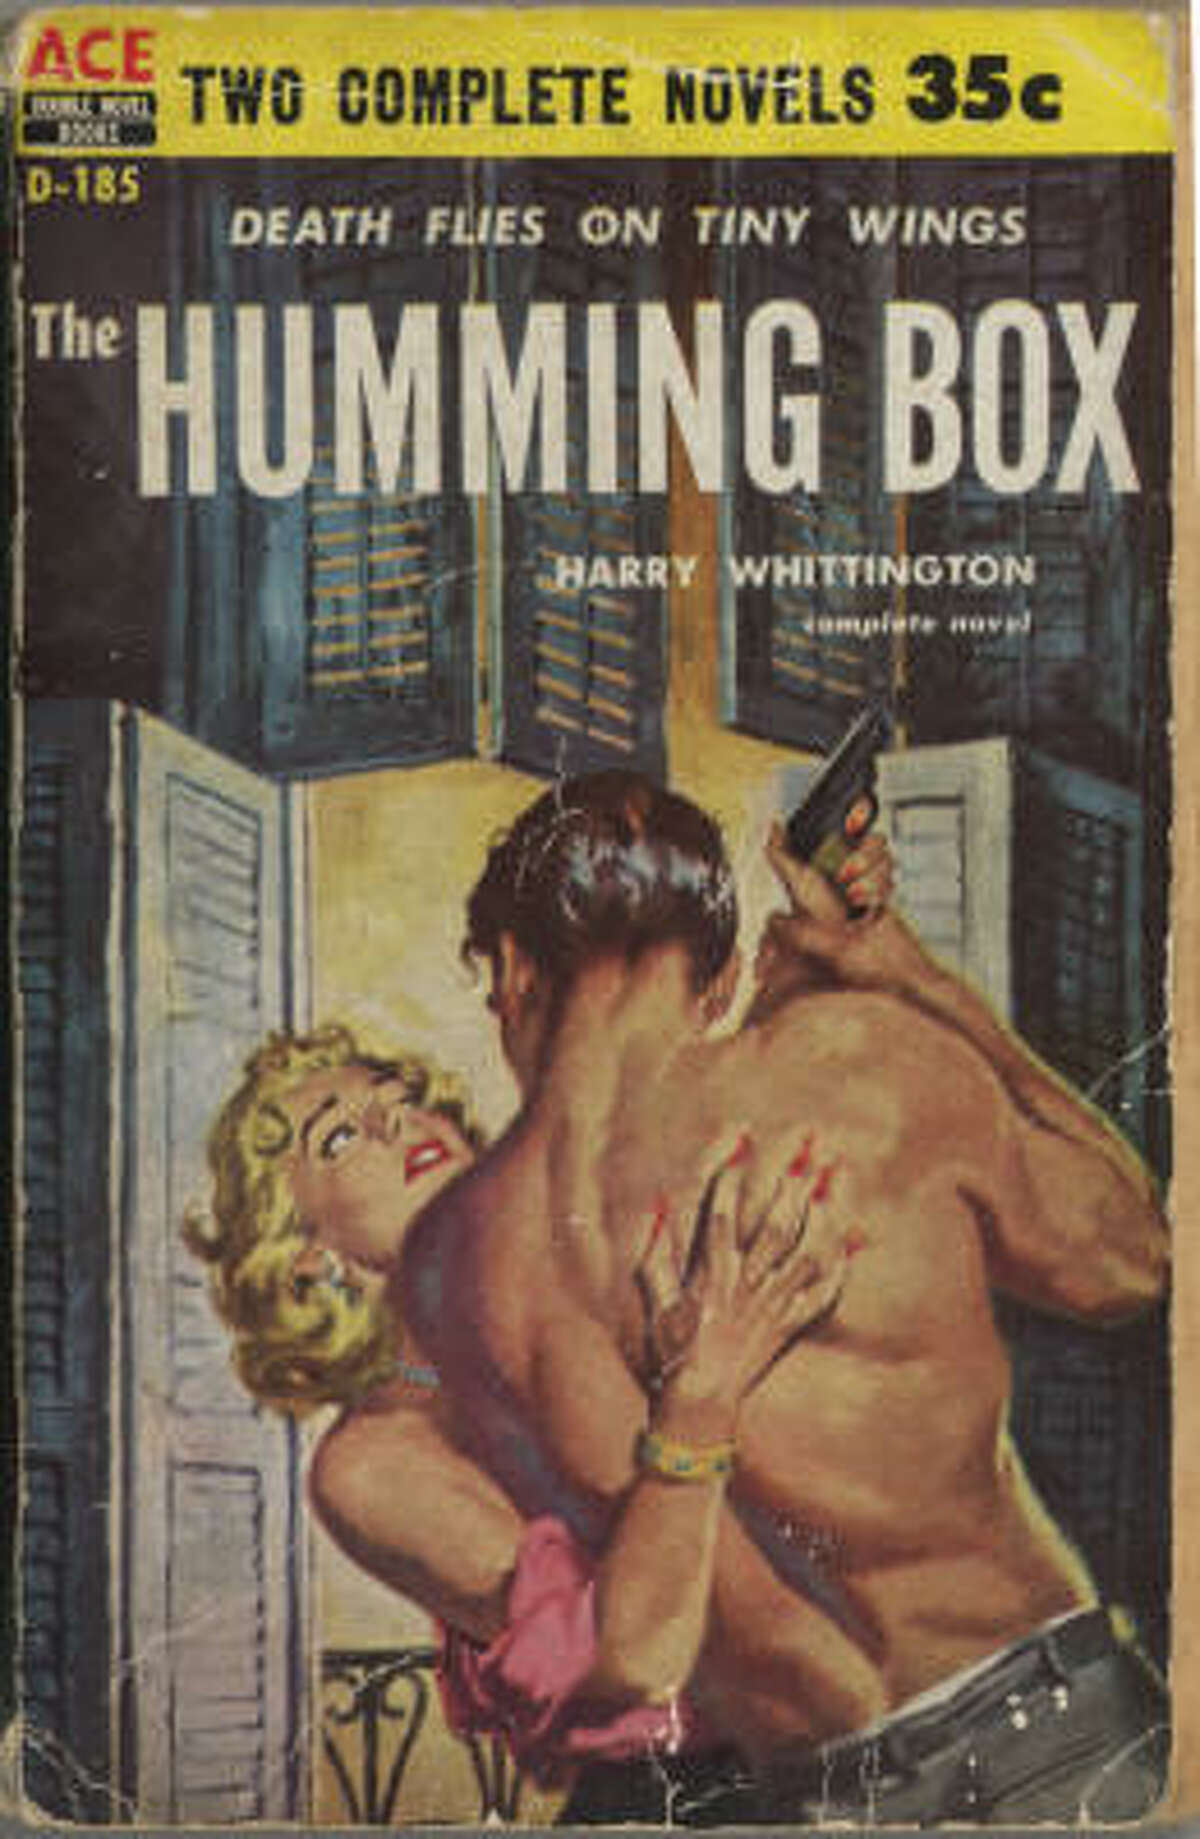 The Humming Box: The flip-side of the ACE Double, Build My Gallows High, this was by a well-known pulp crime writer.